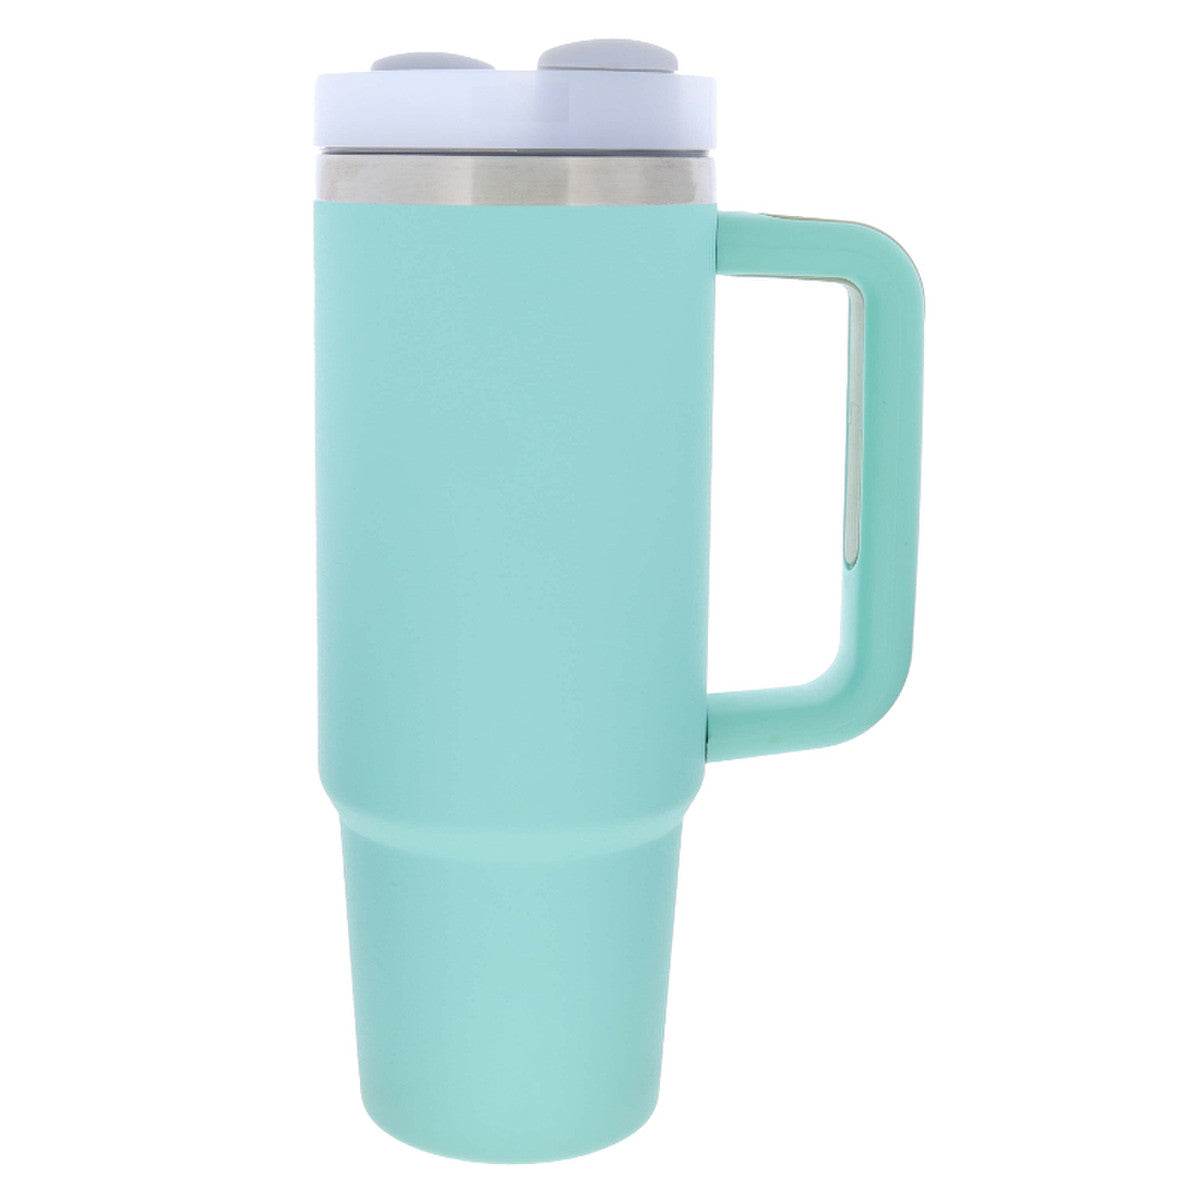 Eucalyptus 30 Oz. Tumbler With Straw and Handle, Stainless Steel